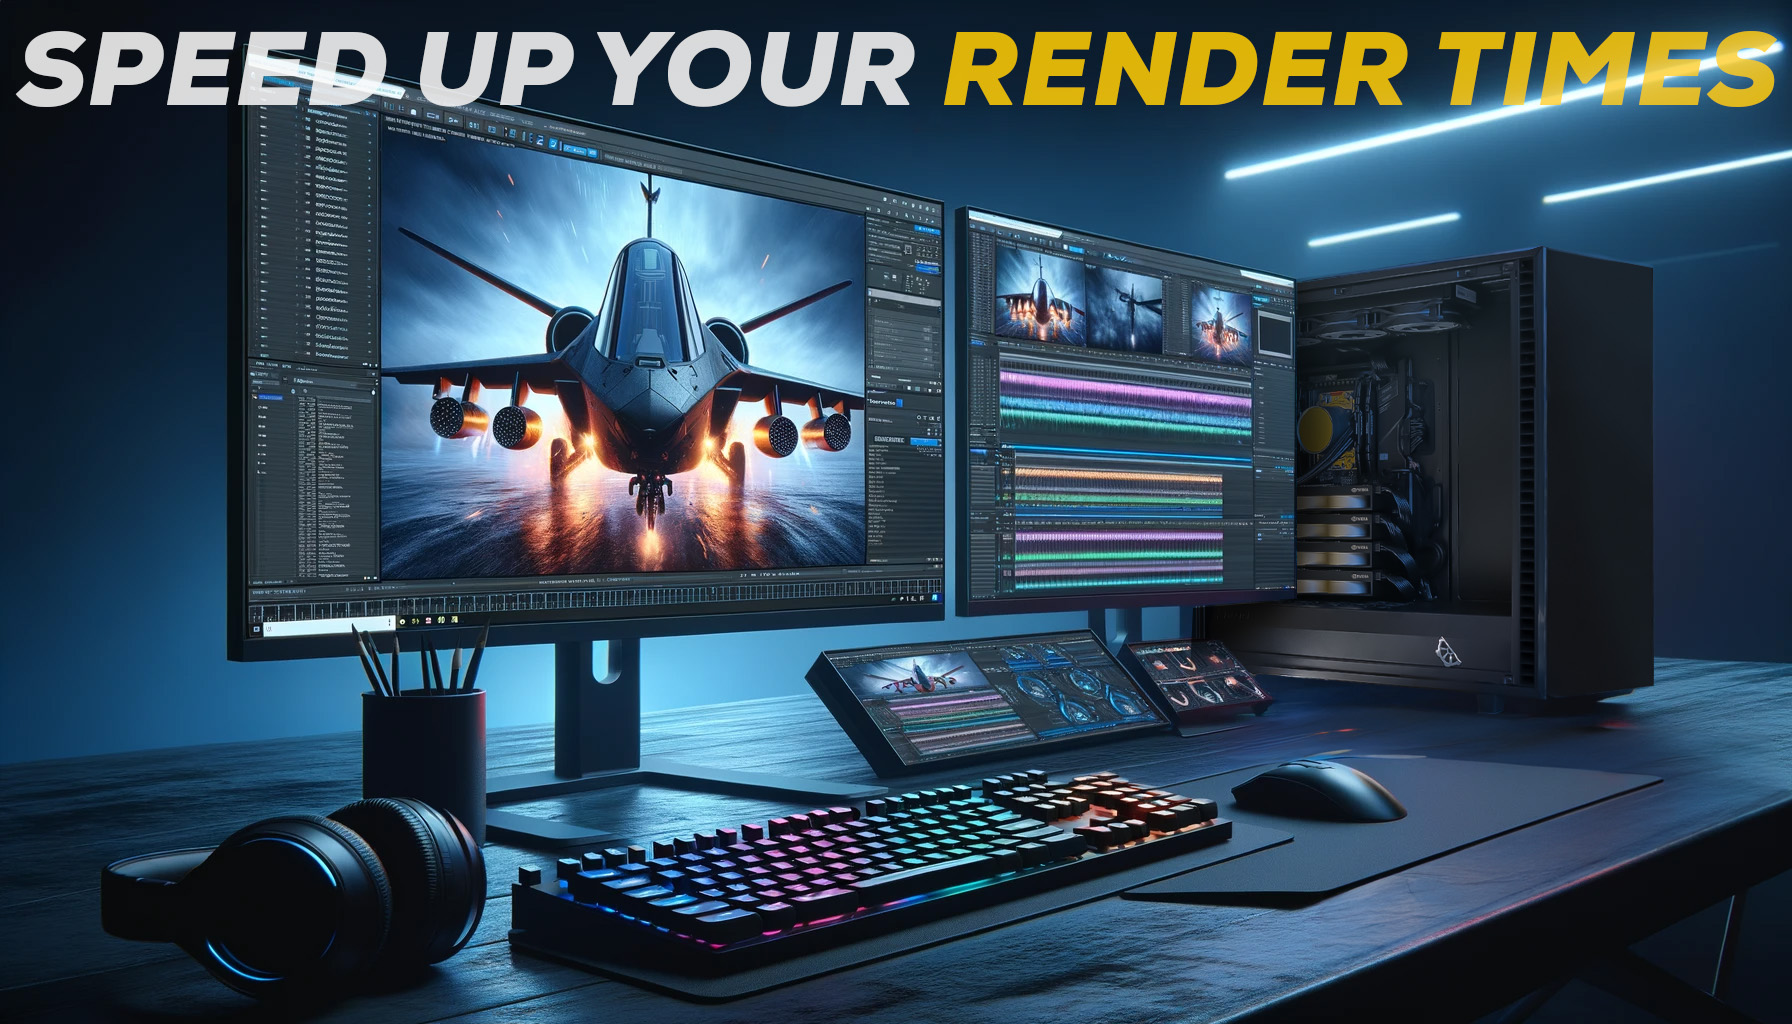 Speed up your Render Times – Ultimate PC Build Guide for VFX & CGI Workflows